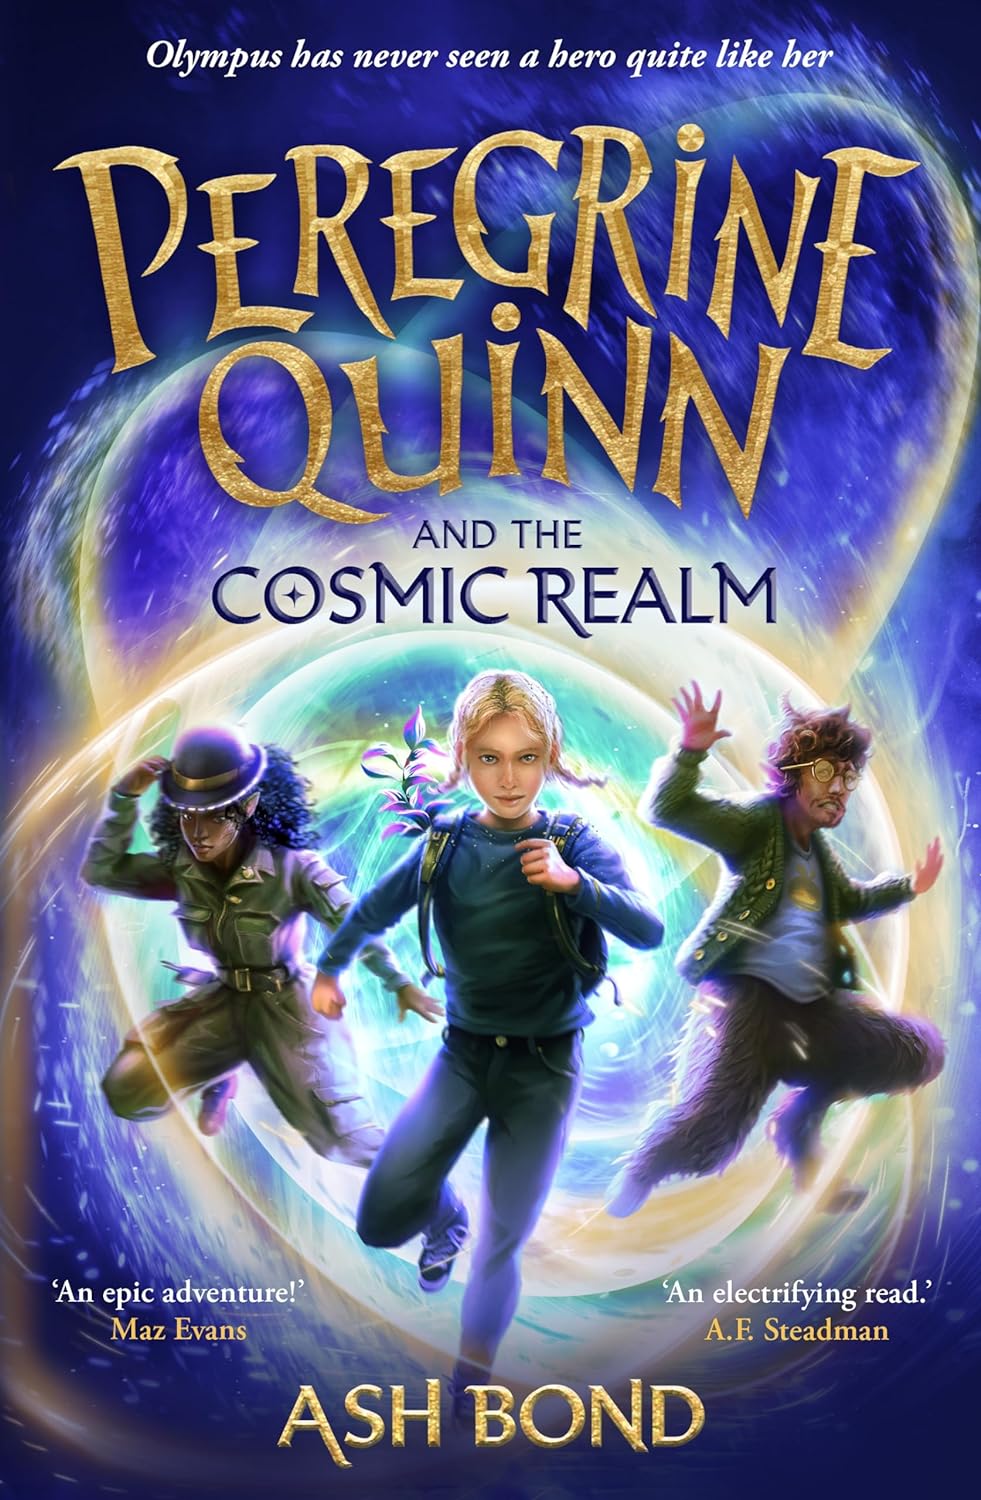 EVENT 25/04/24 Ash Bond introduces Peregrine Quinn and the Cosmic Realm (High Down discount)